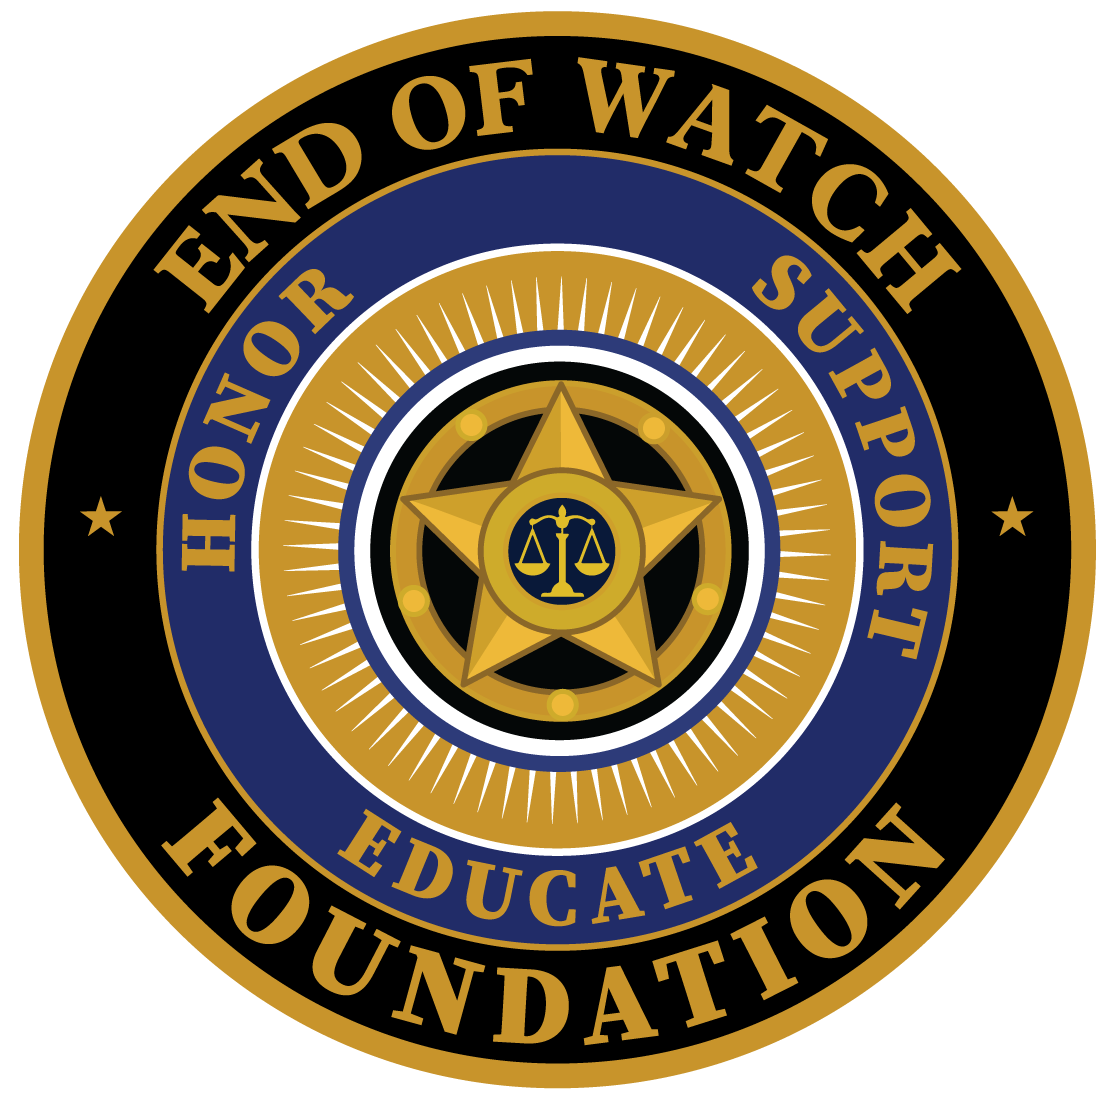 End of Watch Foundation